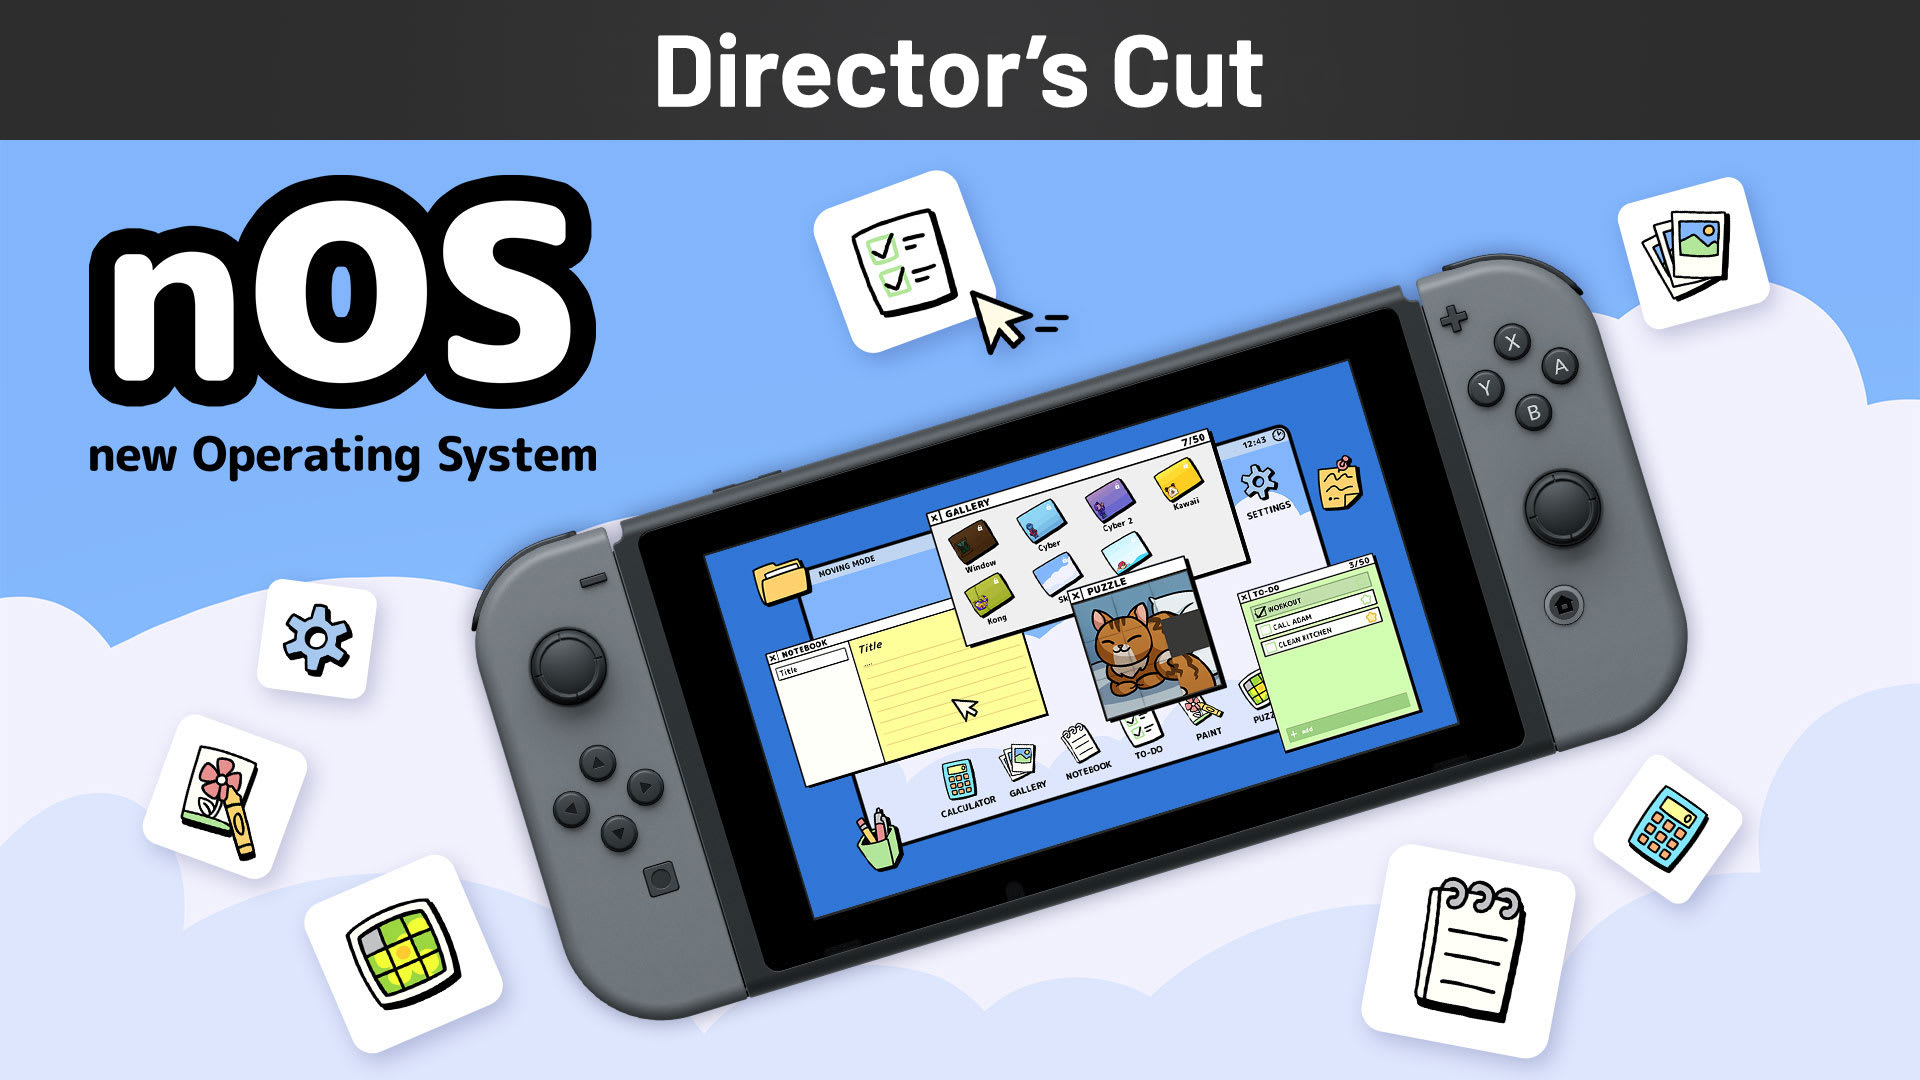 nOS new Operating System Director's Cut 1